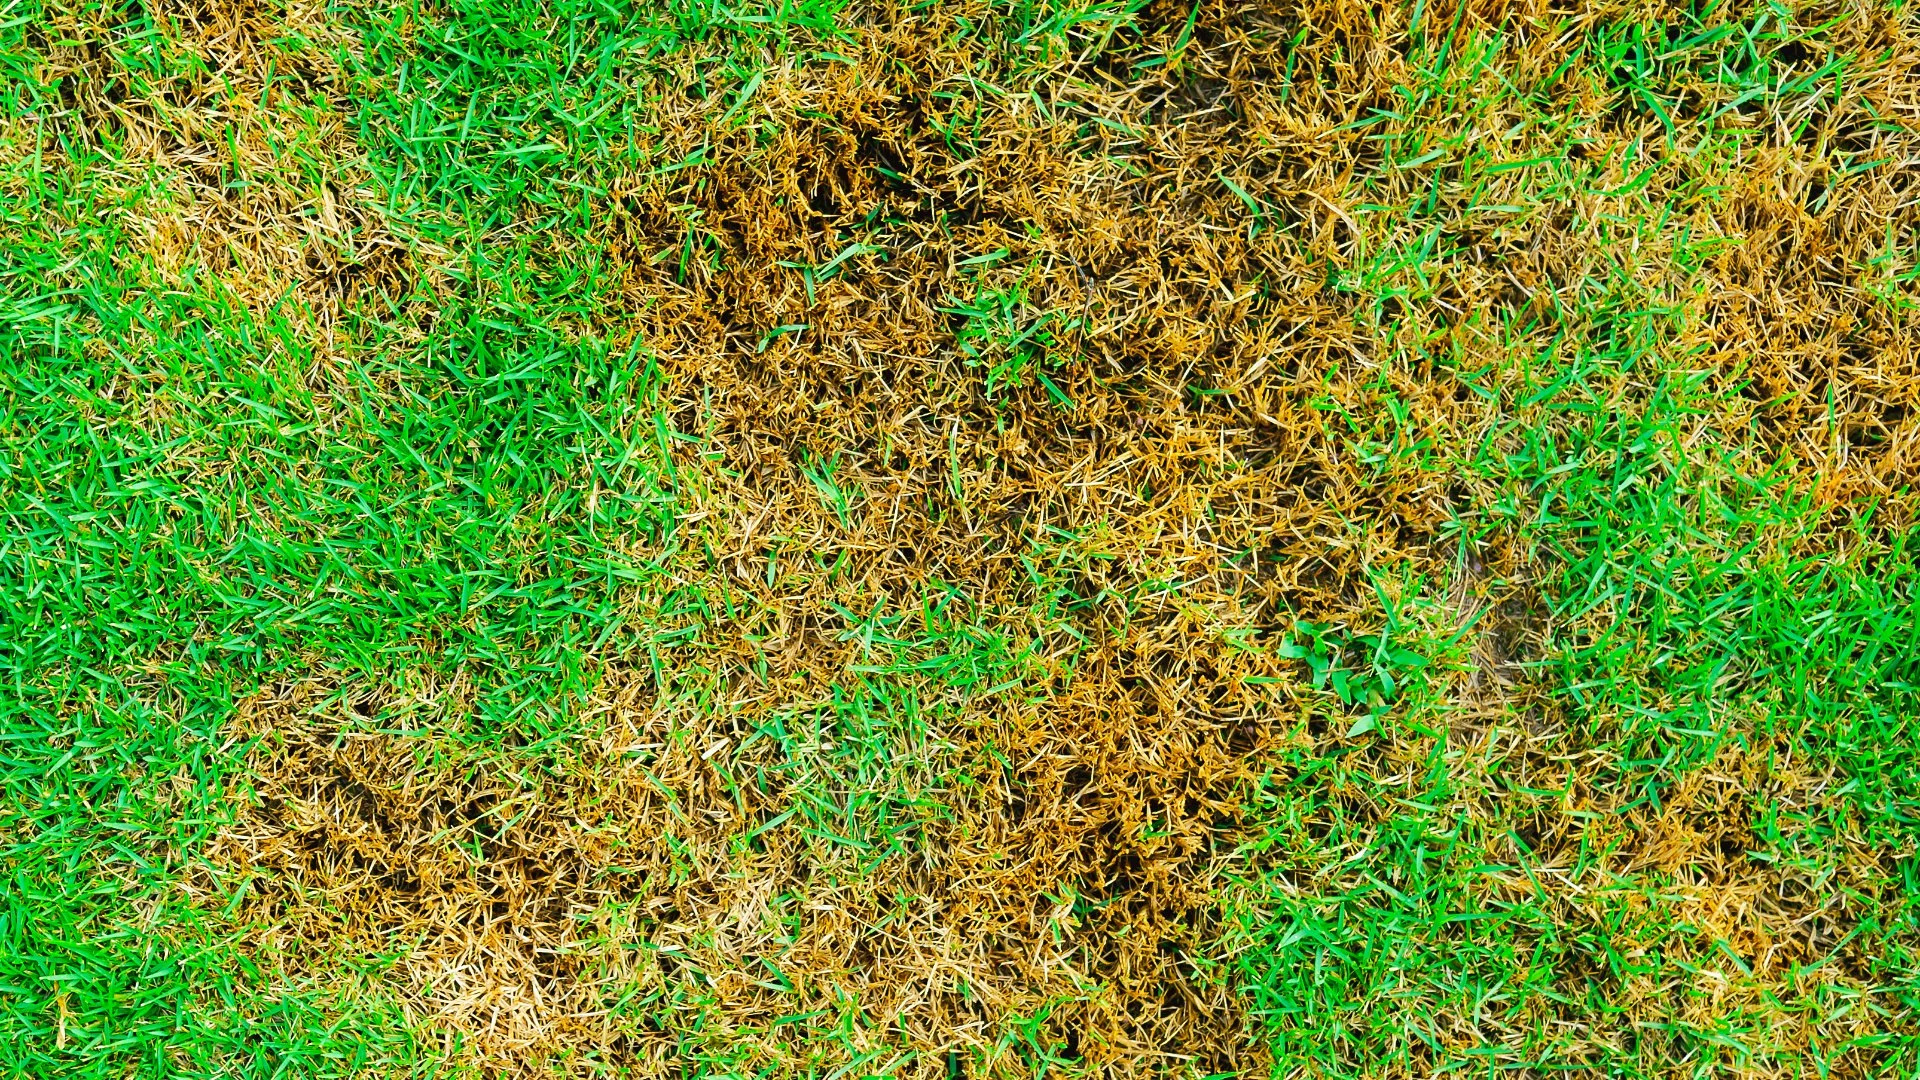 Why Am I Seeing Brown Spots on My Lawn?